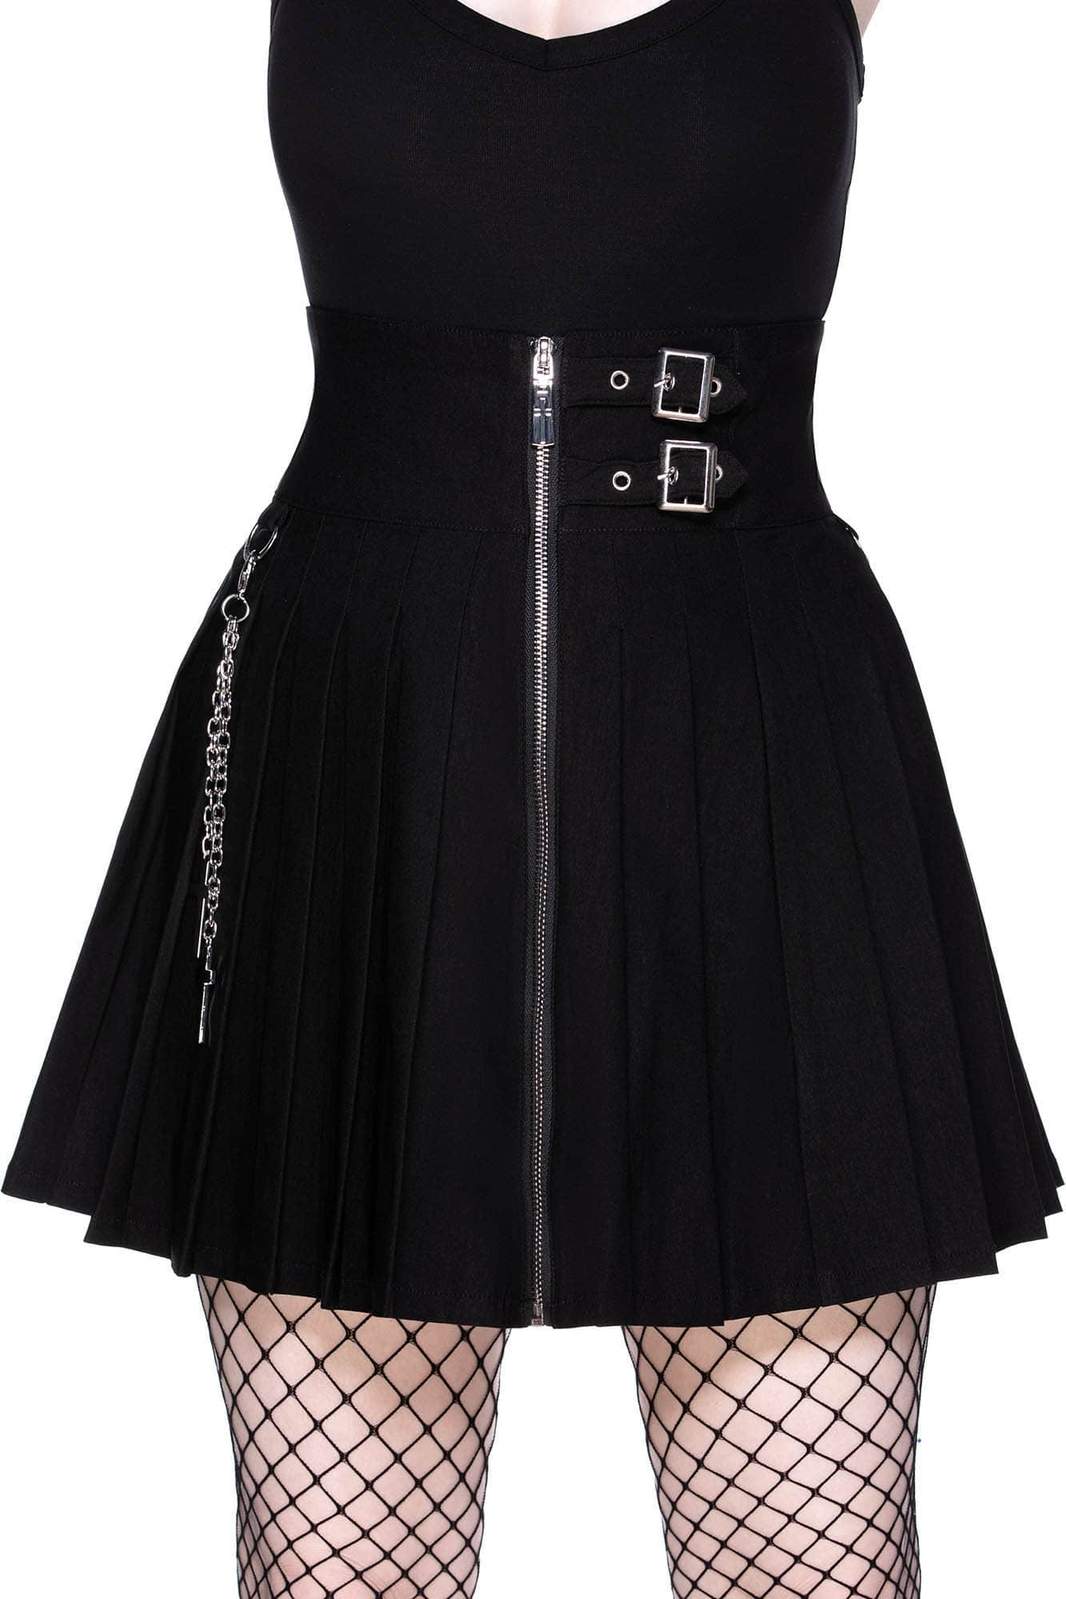 Devil In Disguise Skirt